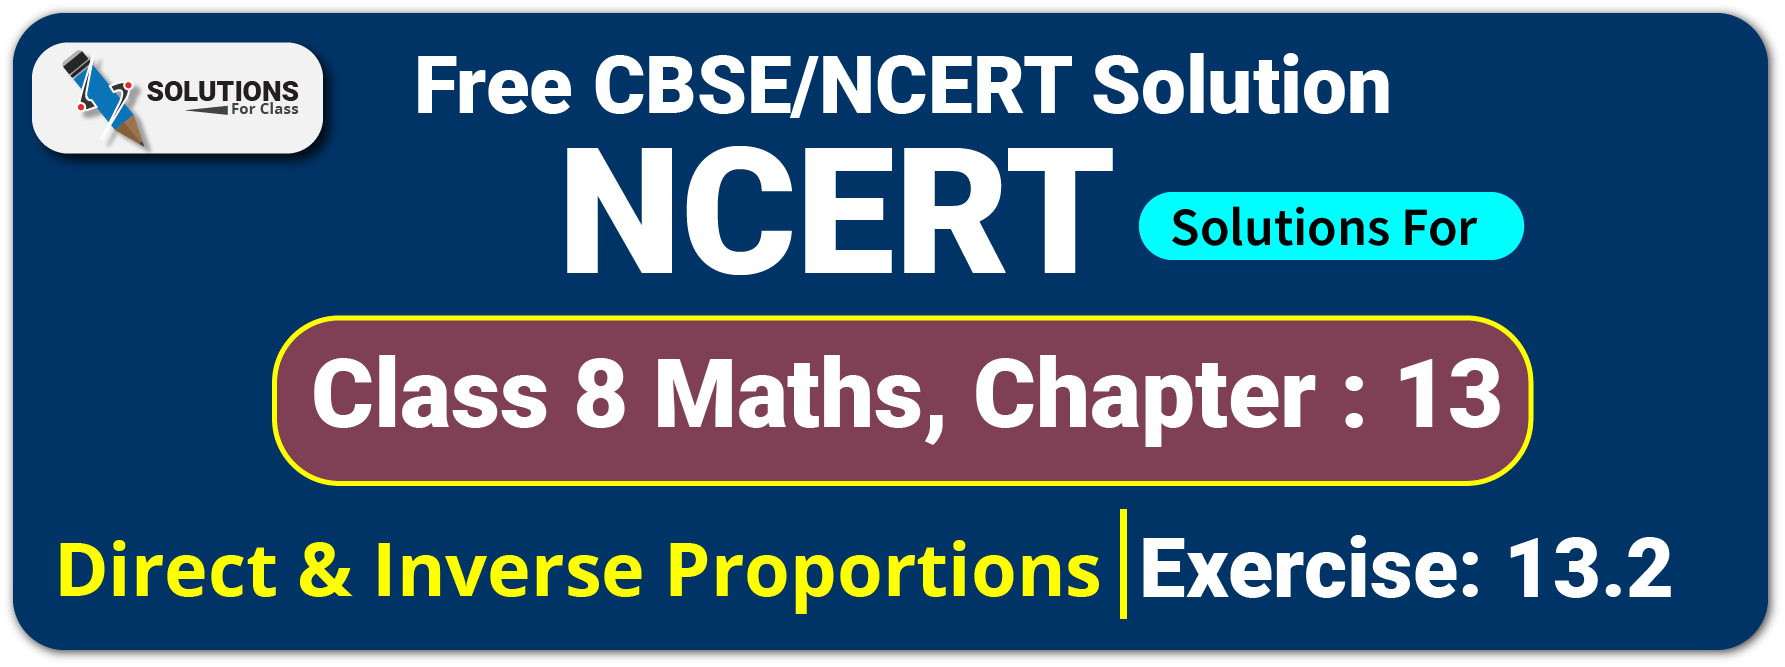 NCERT Solutions For Class 8 Chapter 13, Direct and Inverse Proportions, Exercise13.2